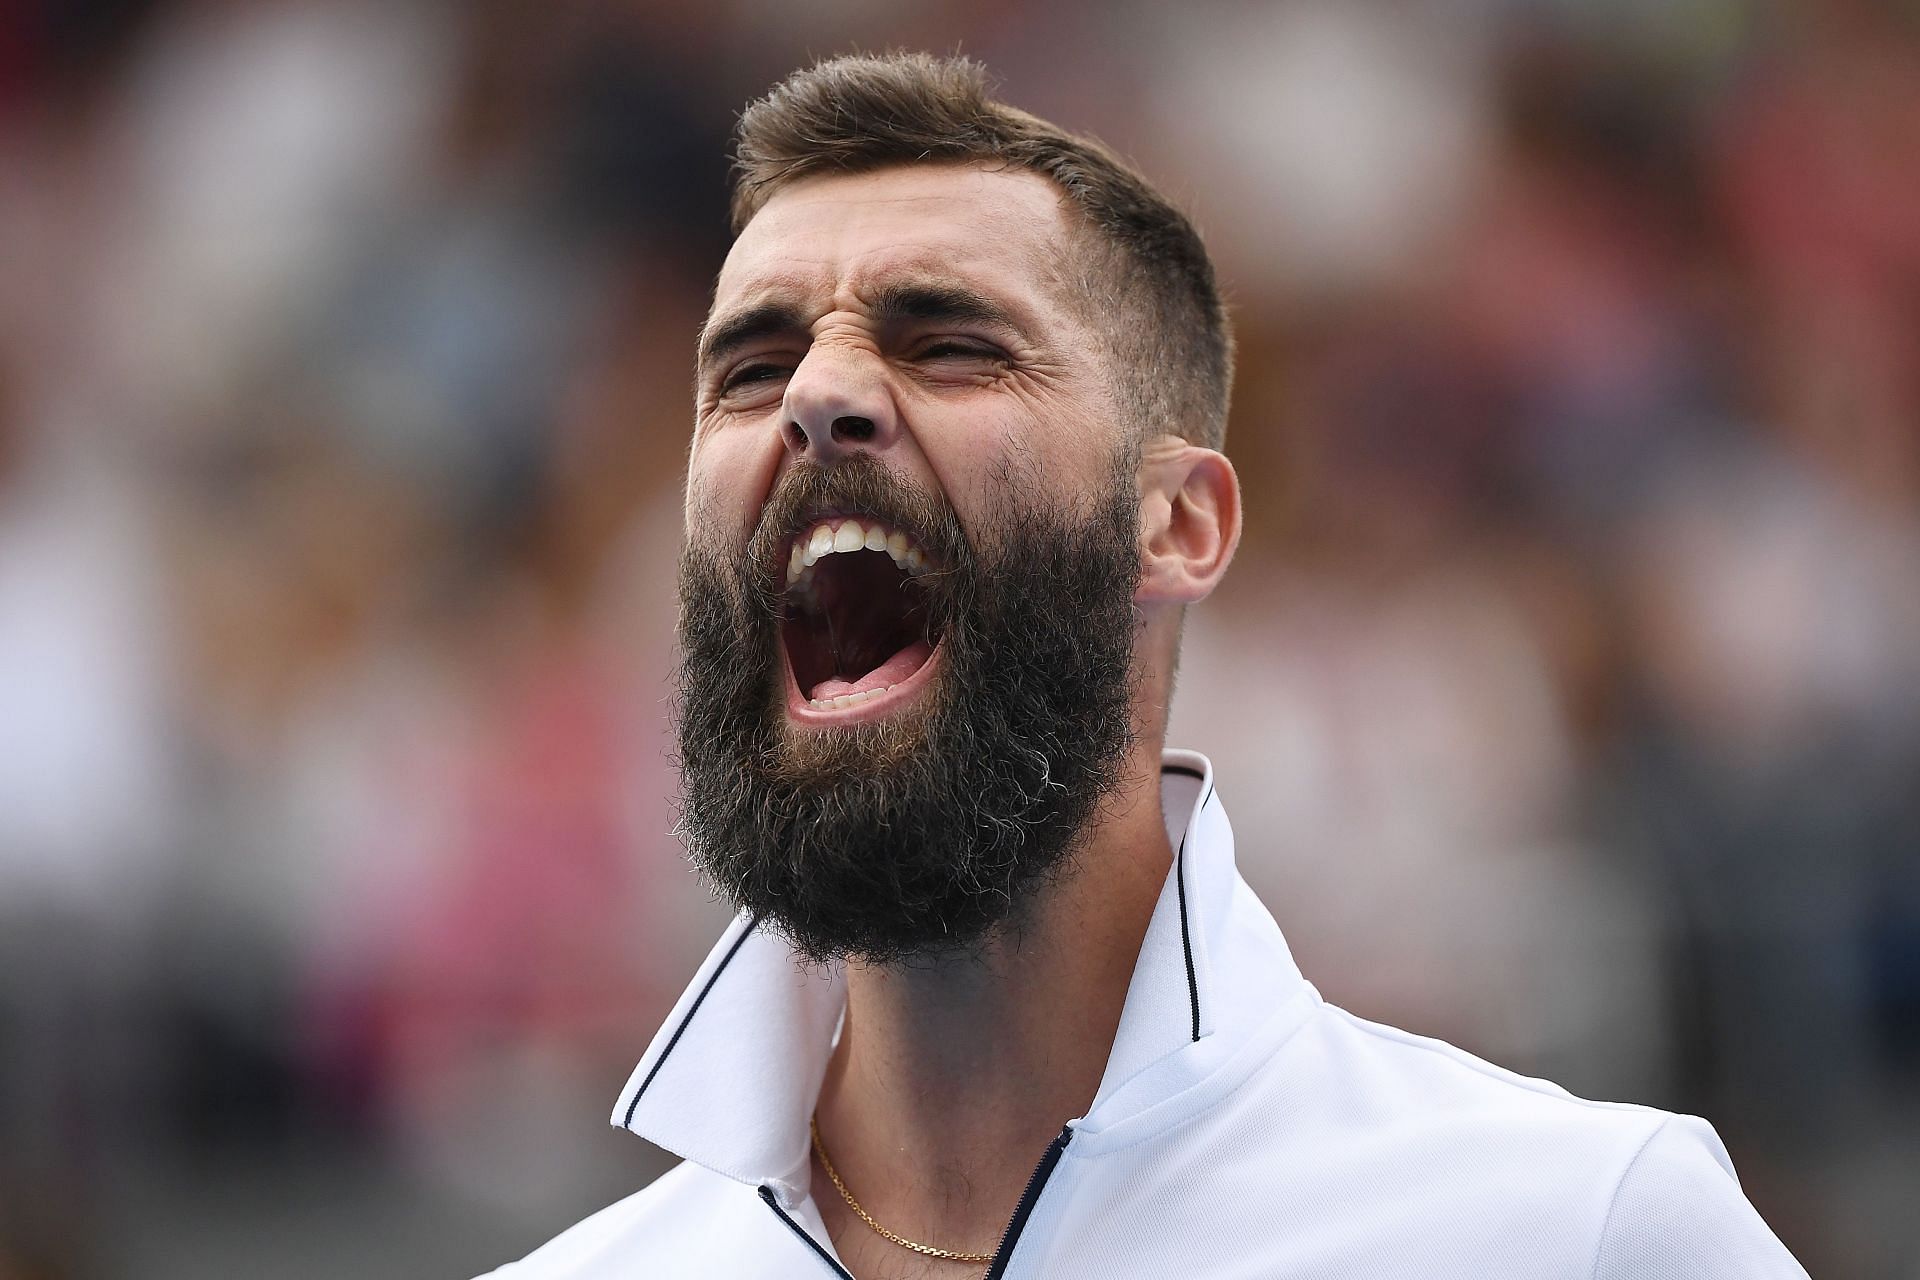 Benoit Paire has been hit with a stream of abuses on social media following his loss at the Estoril Open